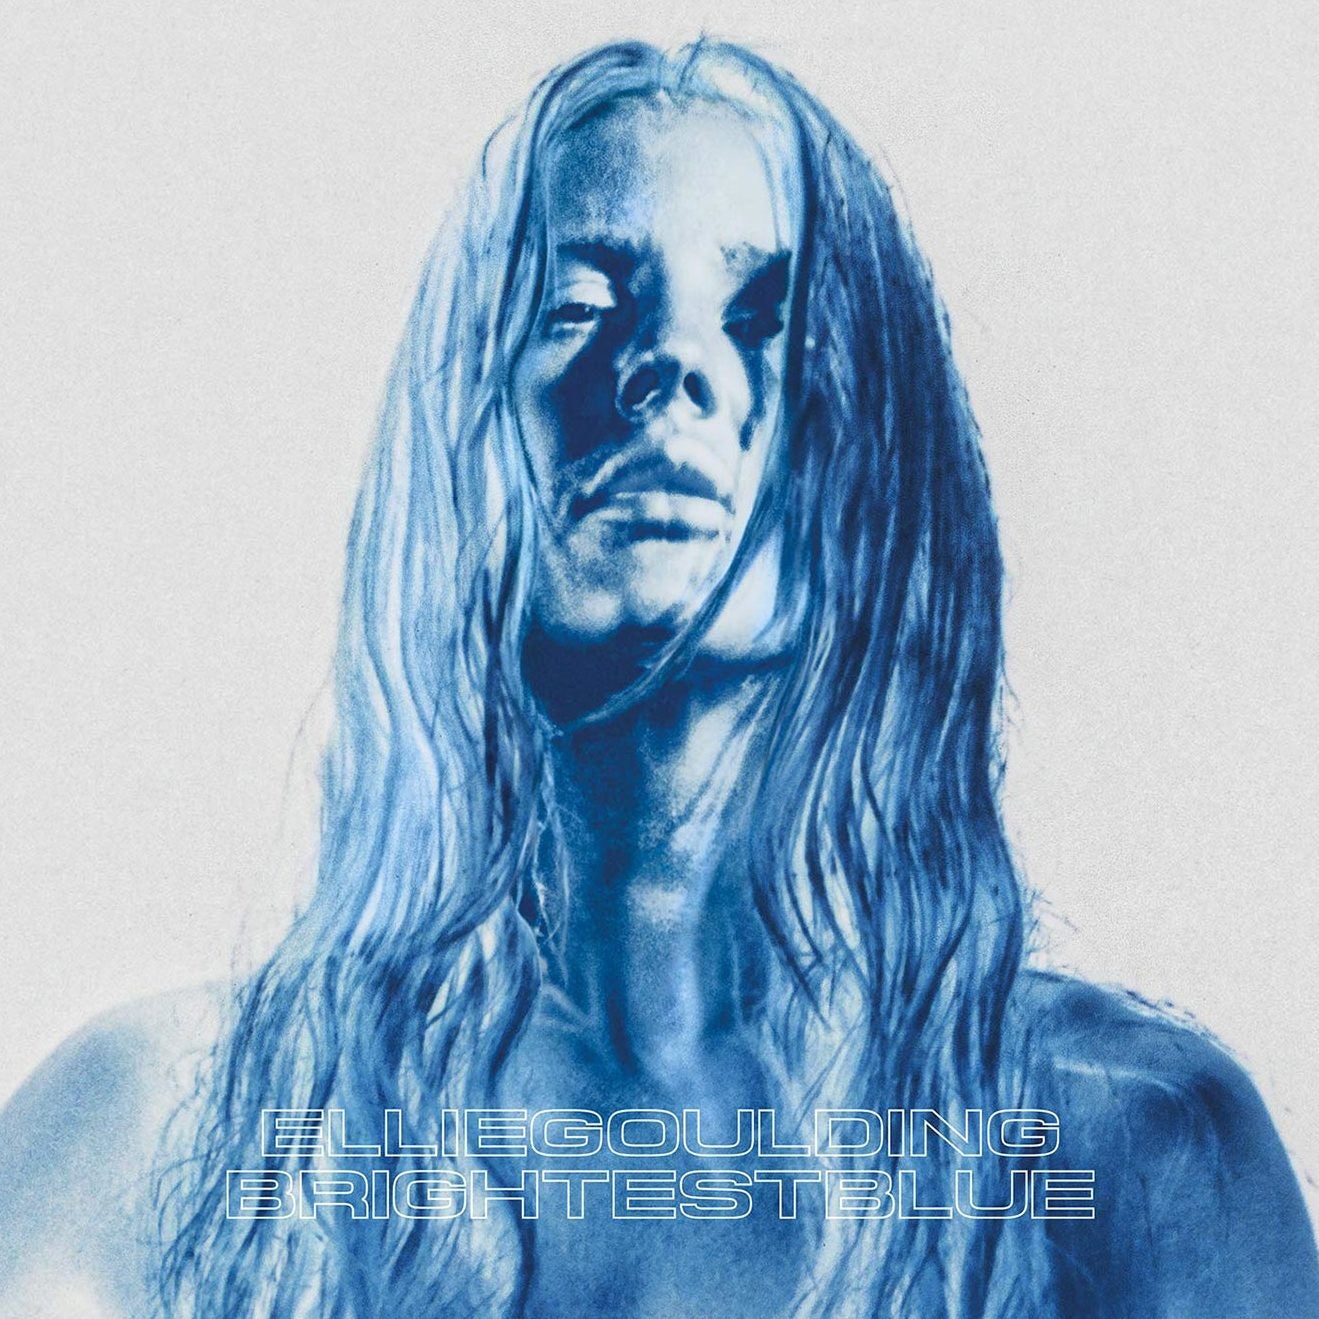 The cover artwork for Goulding’s ‘Brightest Blue’